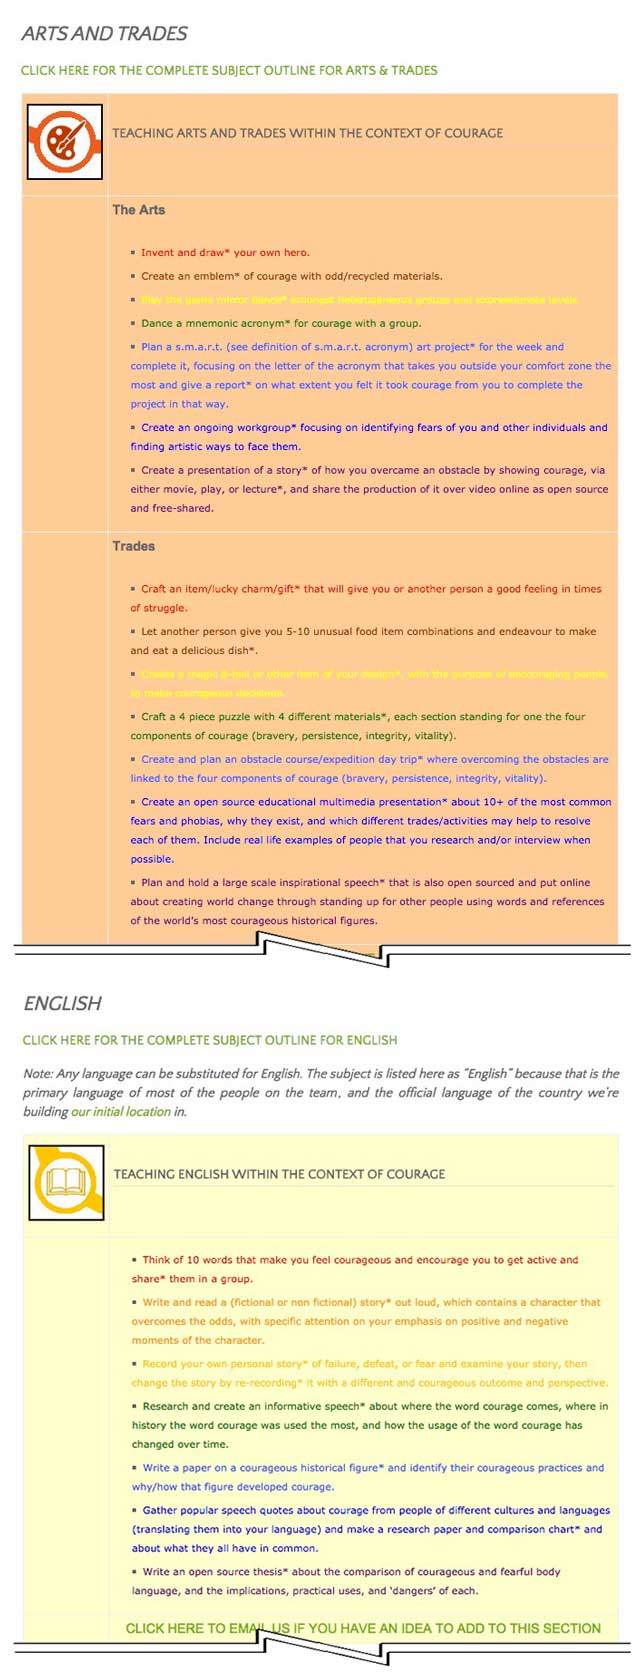 This last week the core team transferred the first 25% of the written content for the Courage Lesson Plan to the website, as you see here. This lesson plan purposed to teach all subjects, to all learning levels, in any learning environment, using the central theme of "Courage" is now 25% completed on our website.